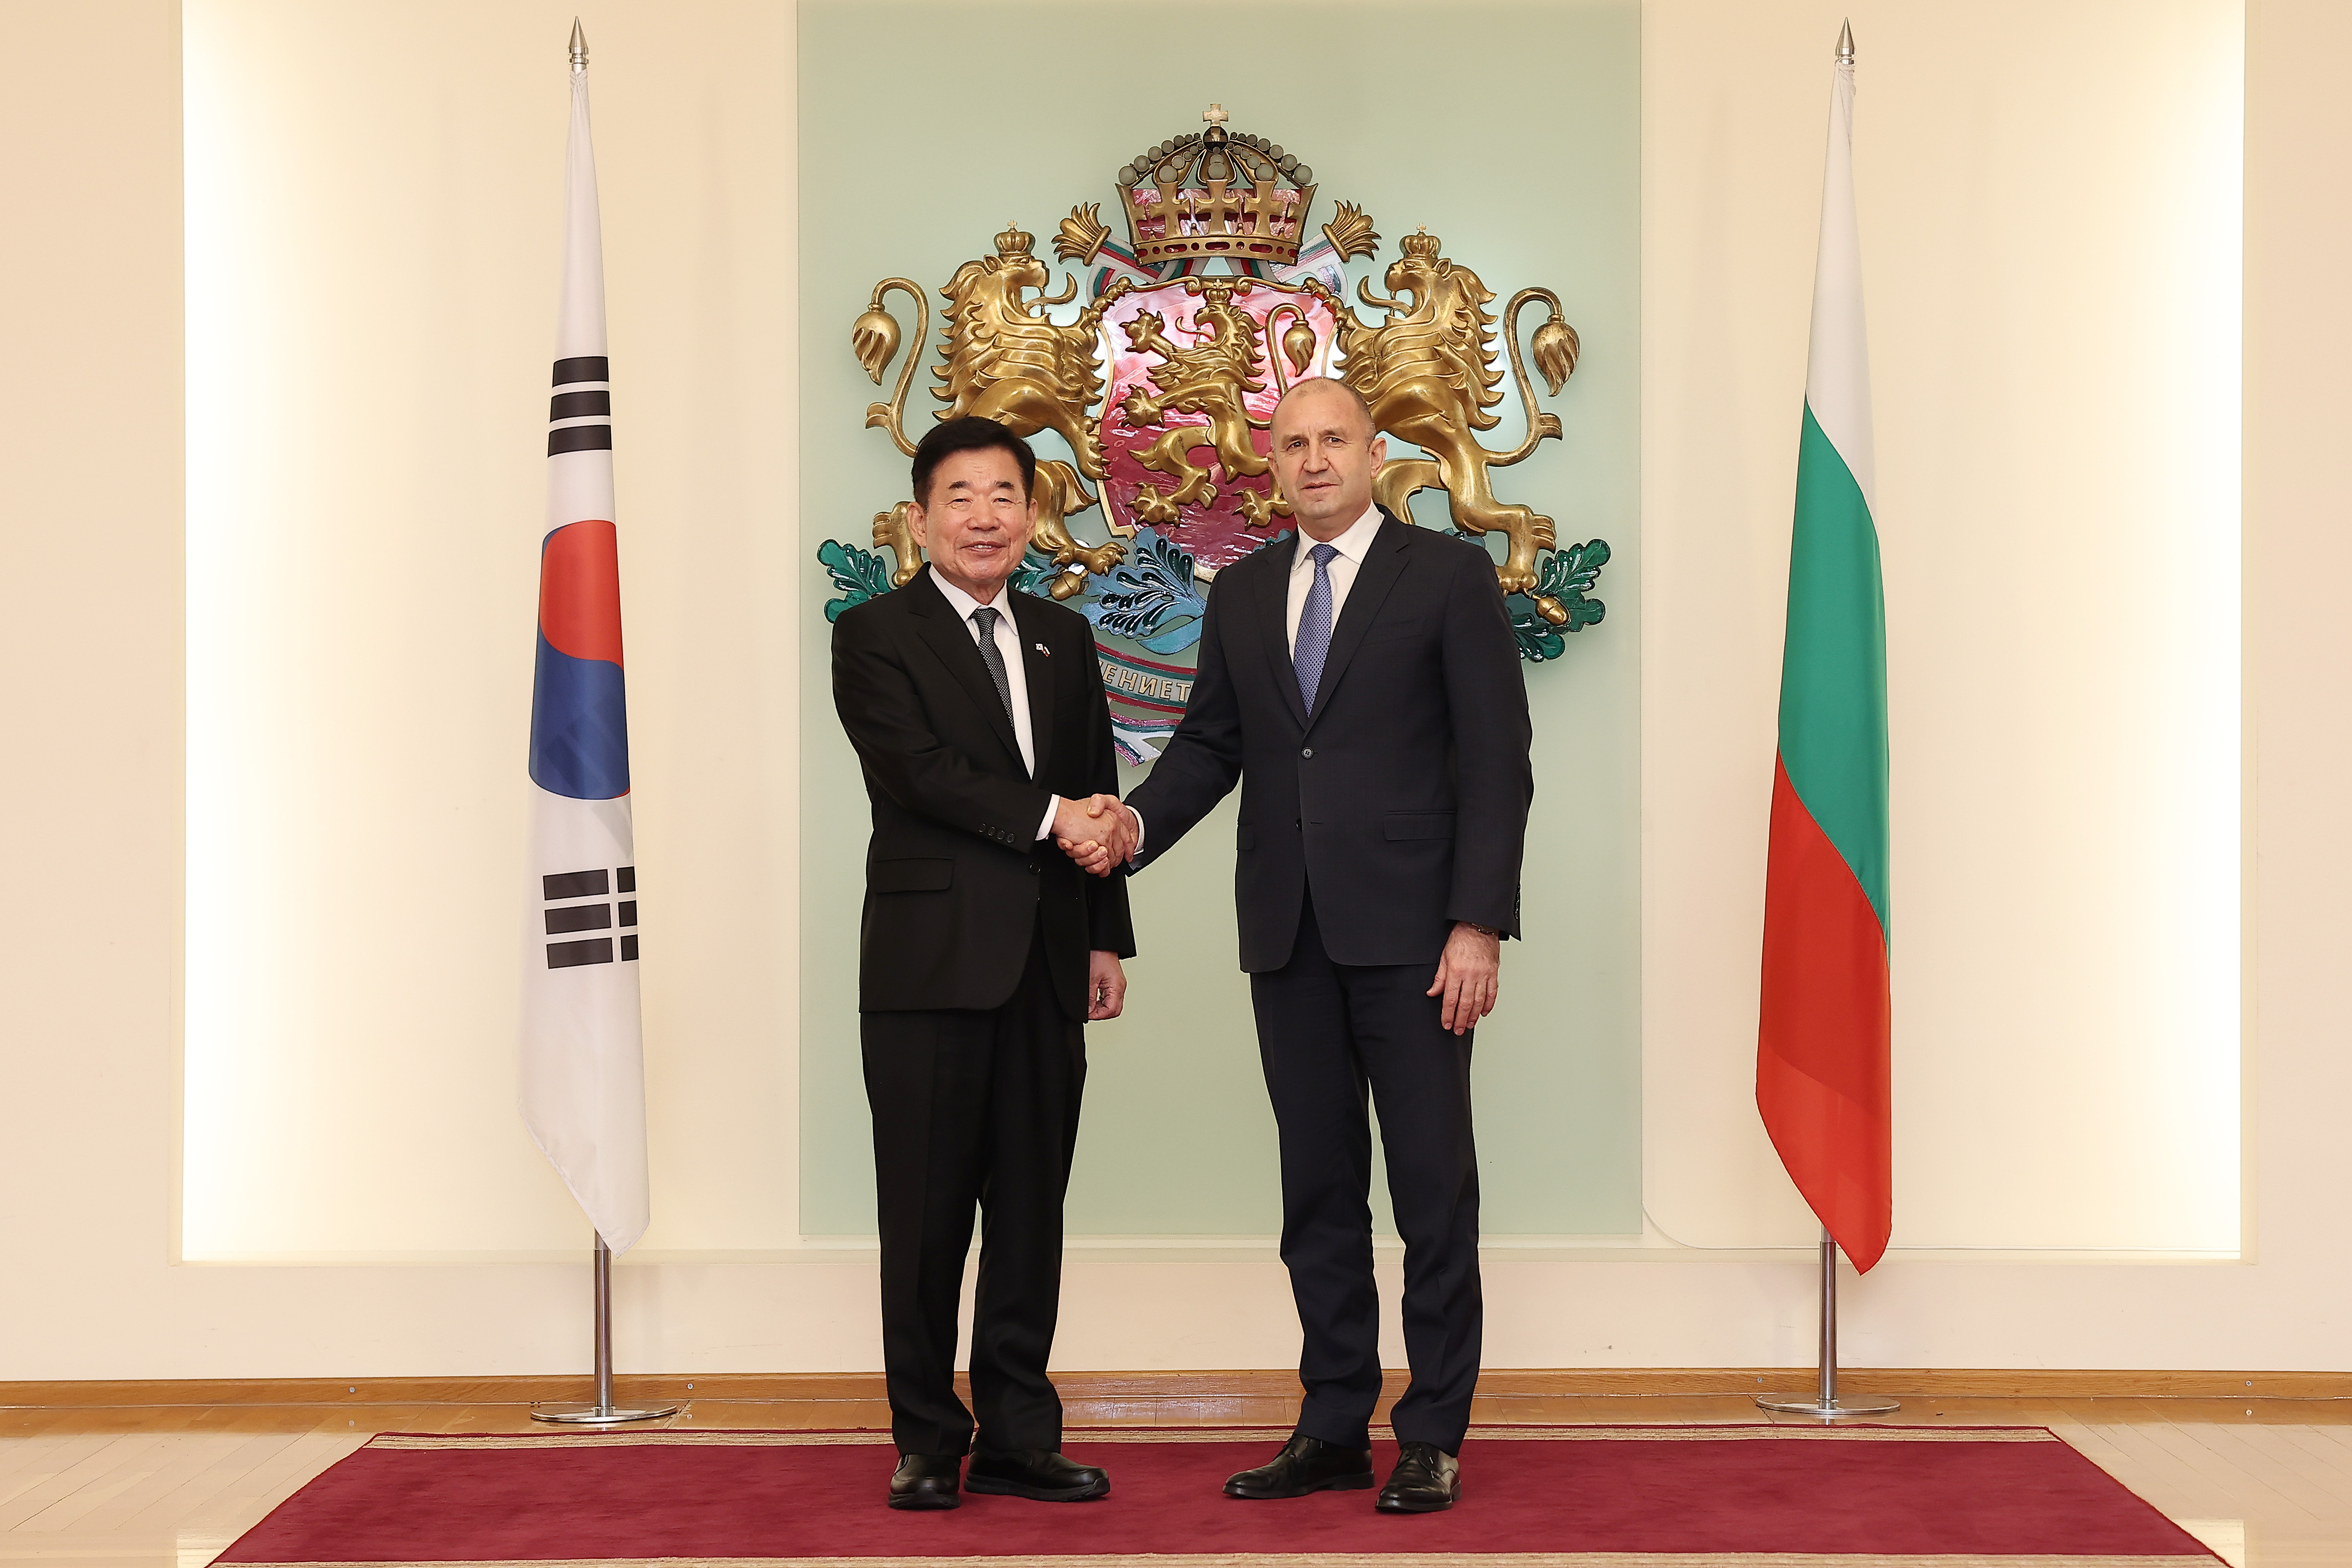 Speaker&rsquo;s economic and sales diplomacy helps Korea win Bulgarian nuclear power plant project 관련사진 3 보기